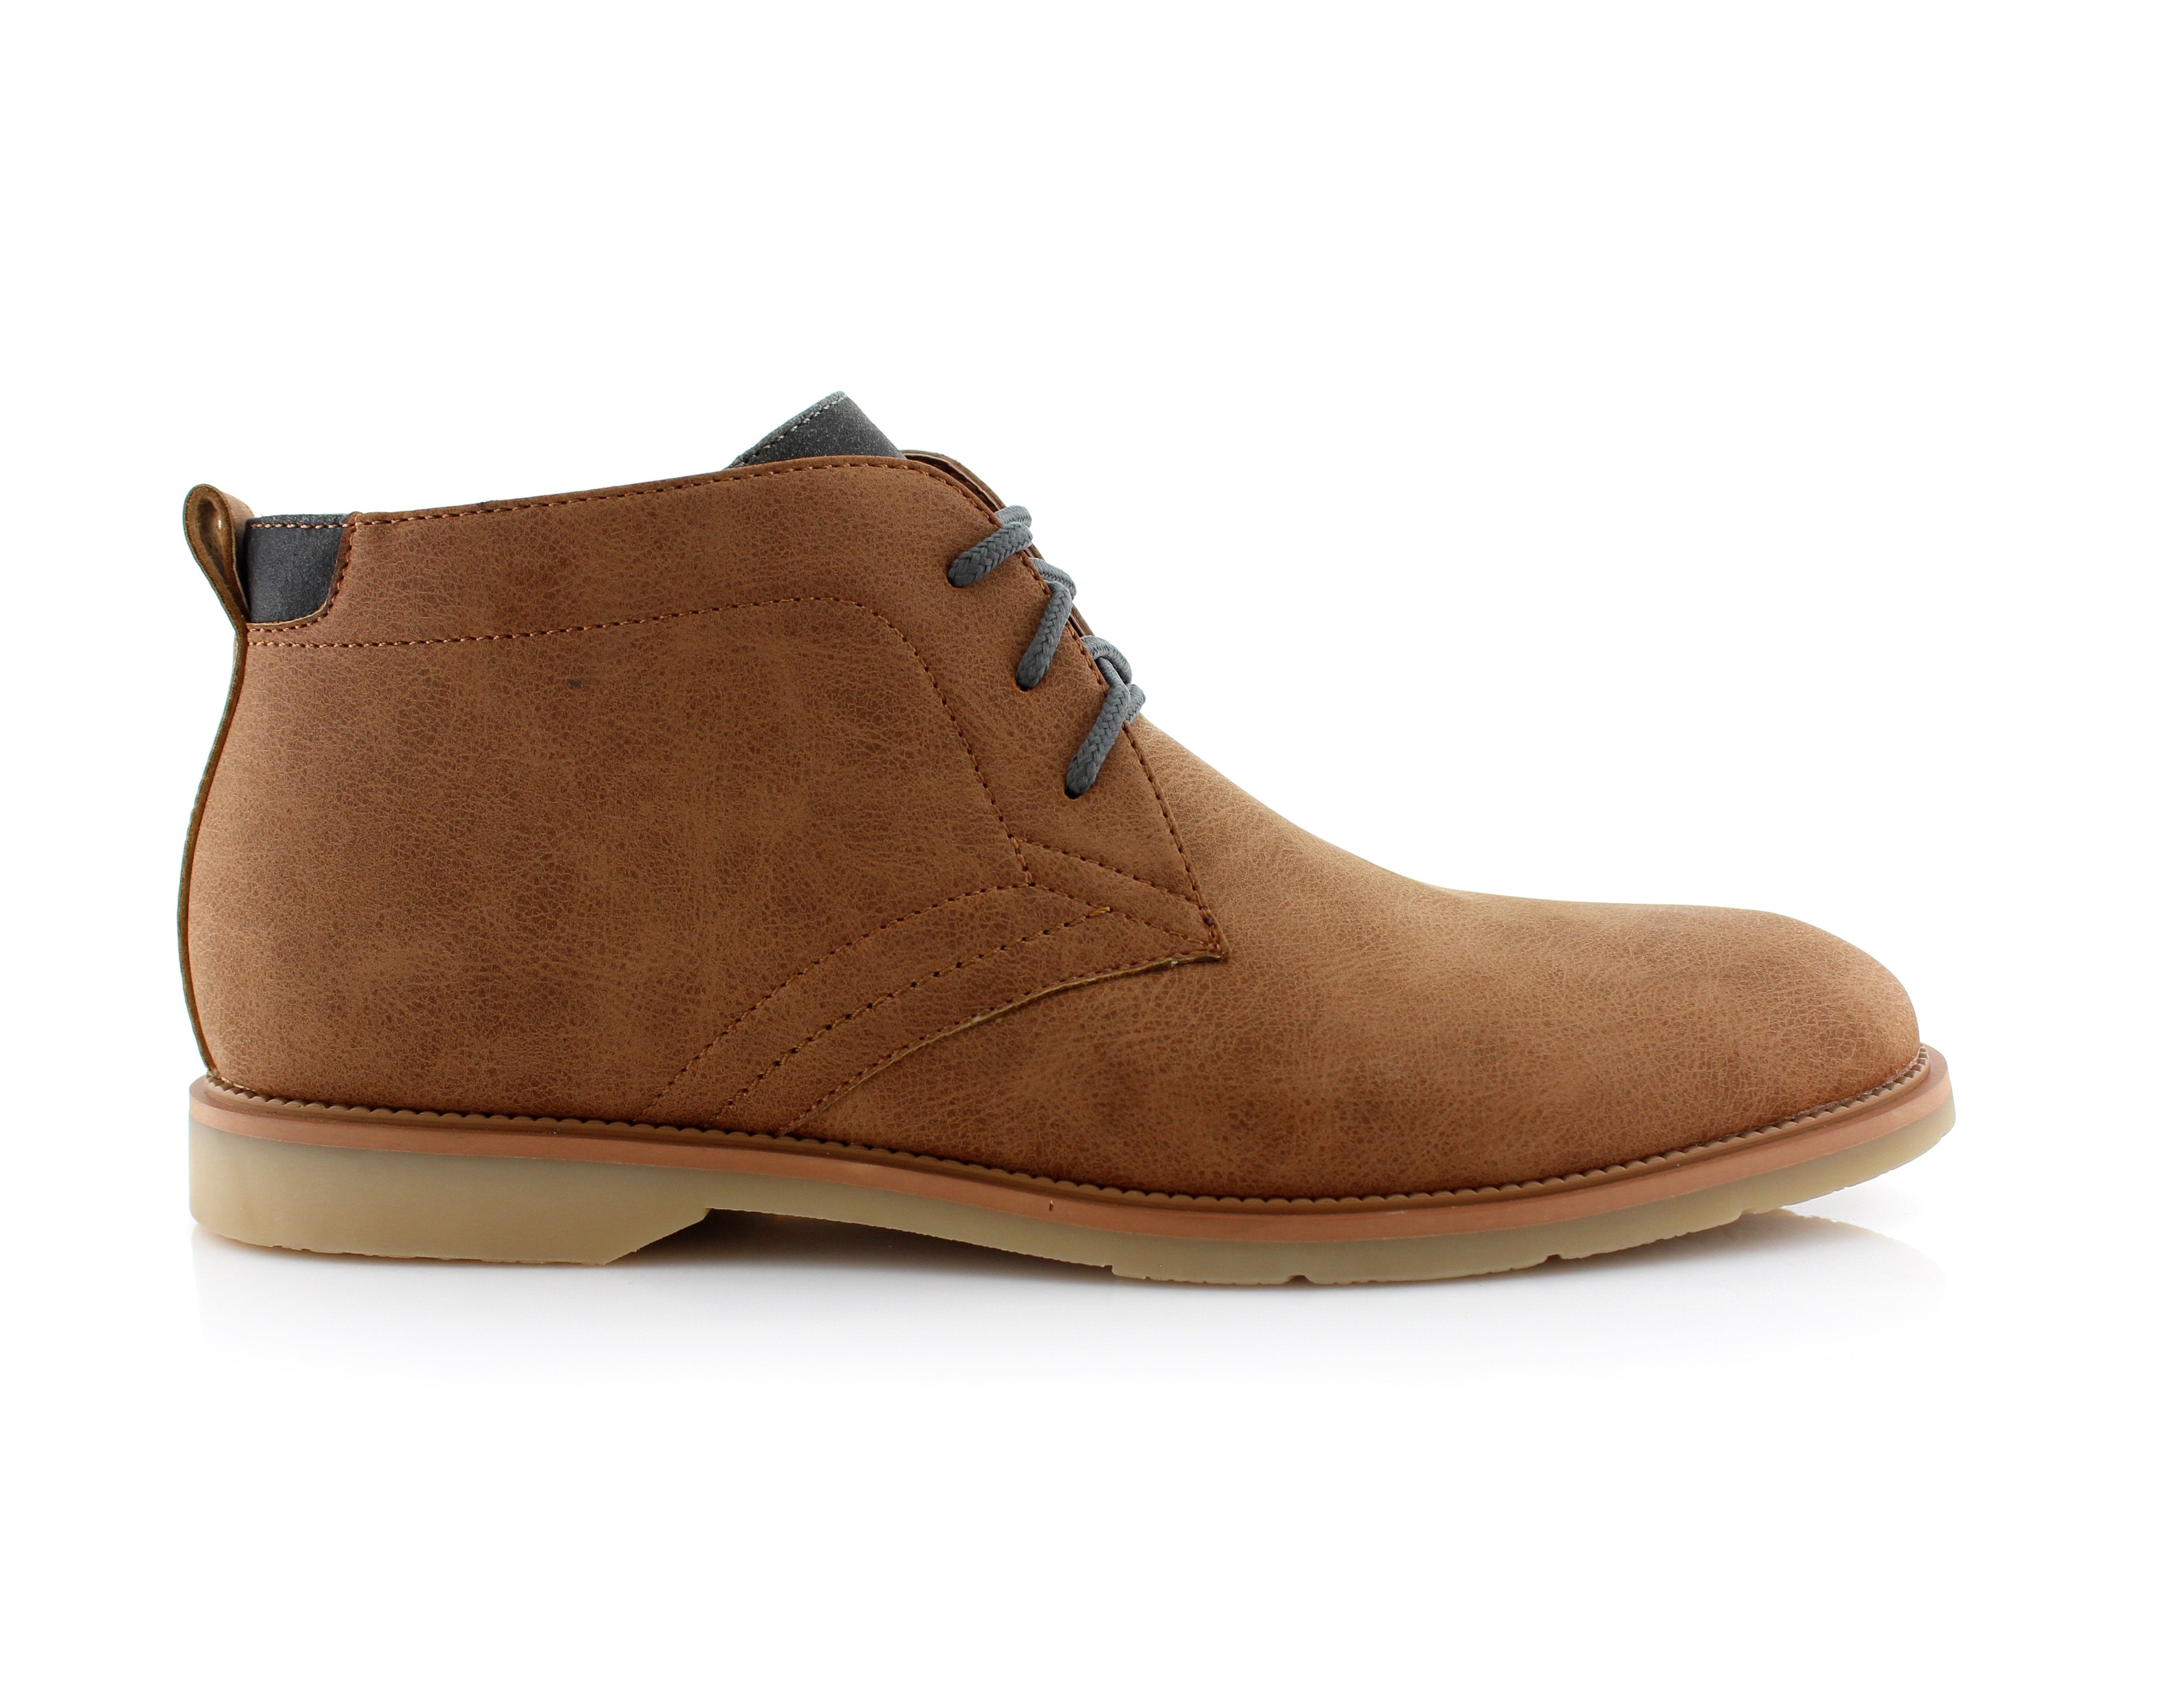 Two-Toned Chukka Boots | Marvin by Ferro Aldo | Conal Footwear | Outer Side Angle View